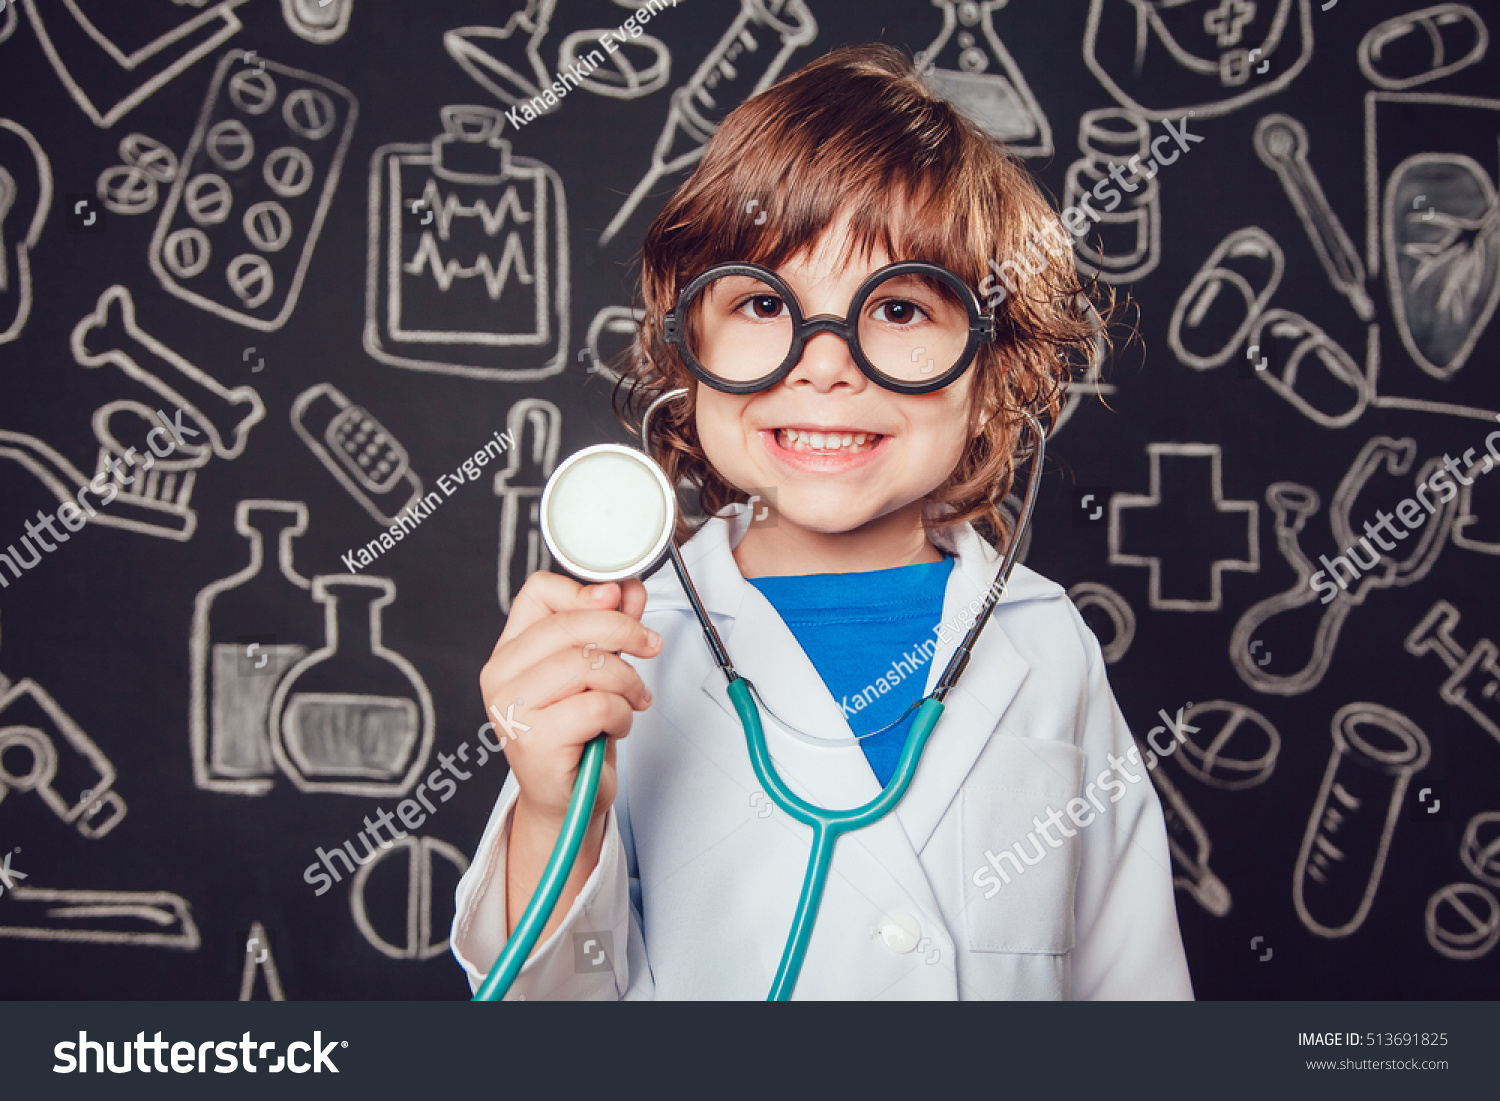 Happy little boy in doctor costume holding sthetoscope on dark background with pattern. The child has glasses #513691825